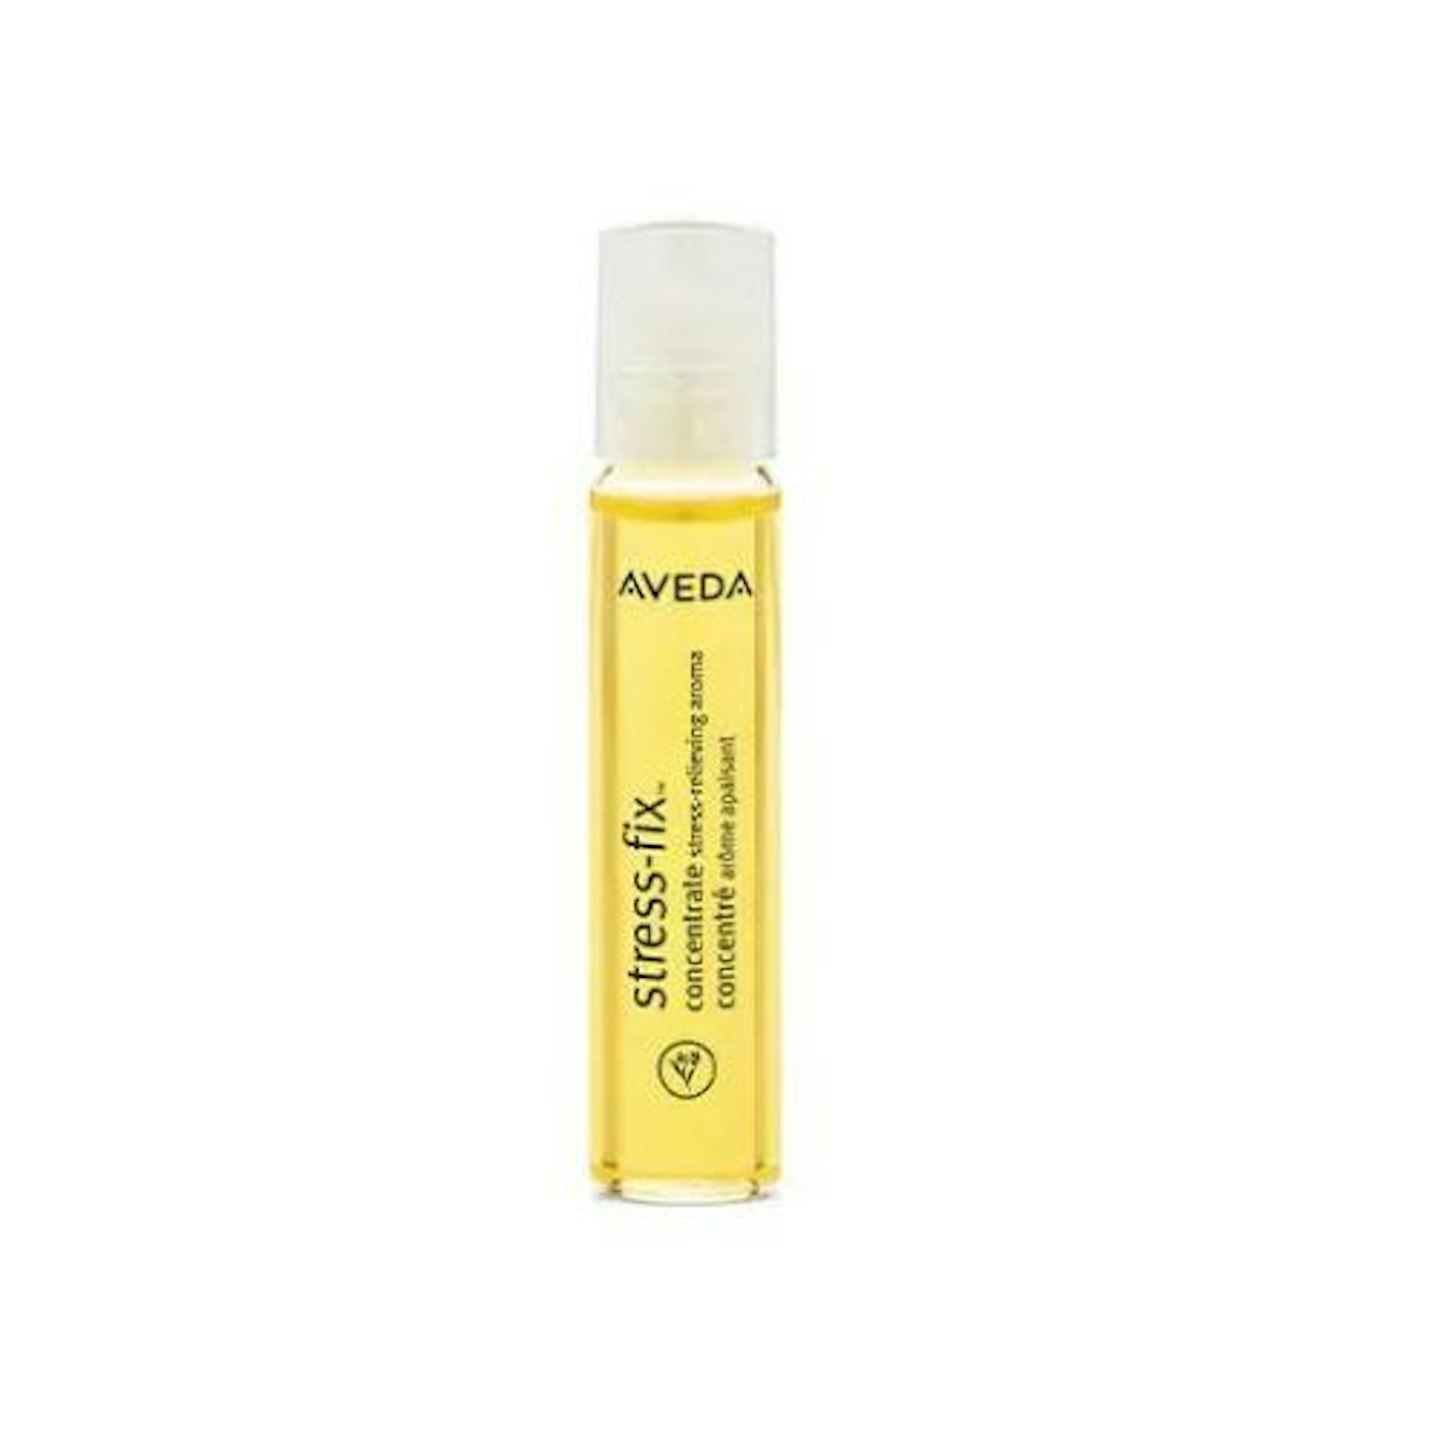 Aveda Stress-Fix Concentrate